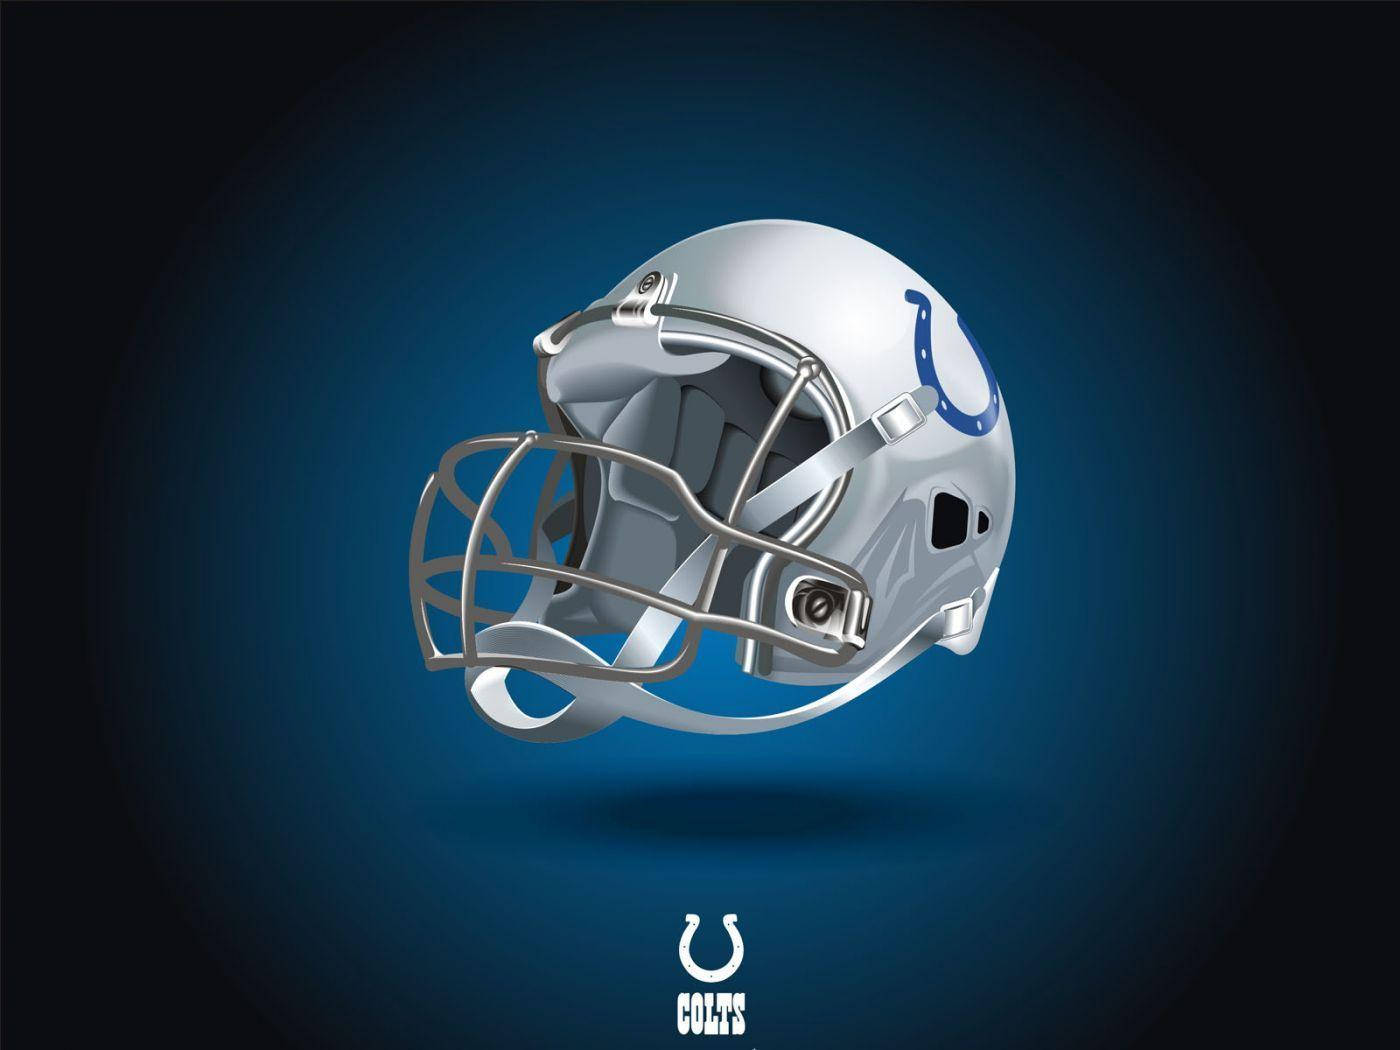 3dindianapolis Colts Helm Wallpaper